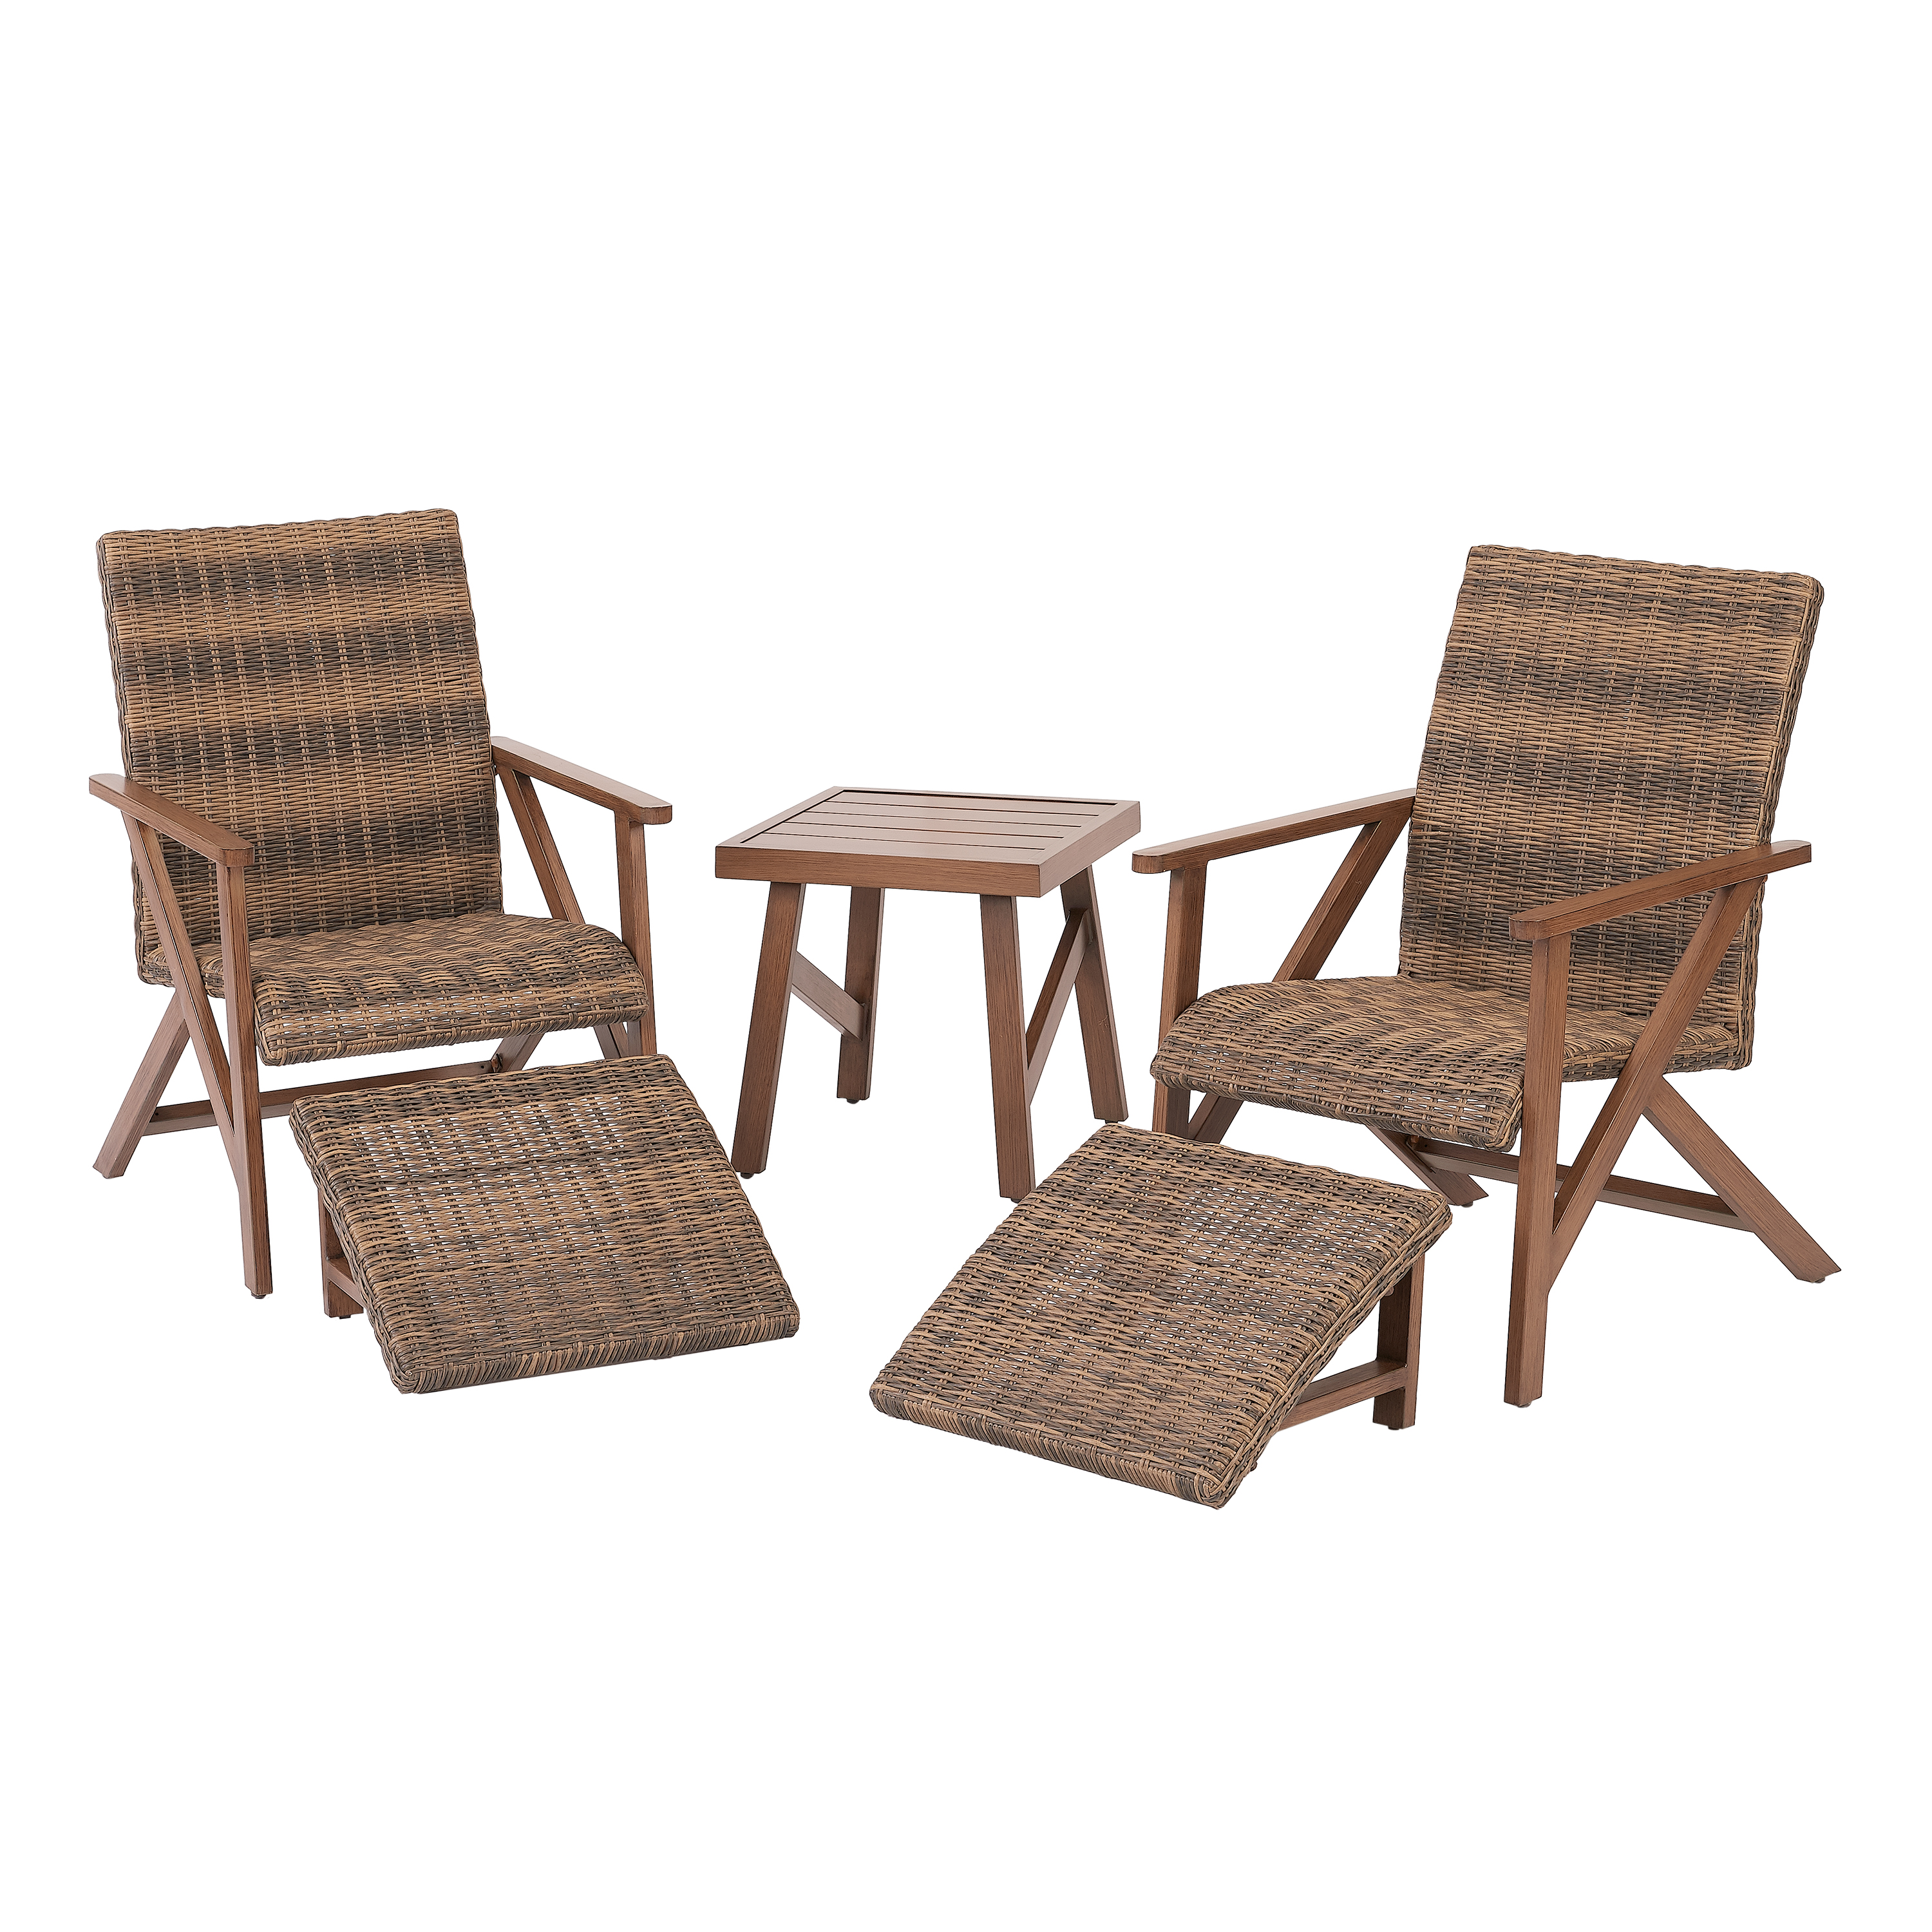 Better Homes And Gardens Kewich 5 piece Chat Set - image 4 of 6